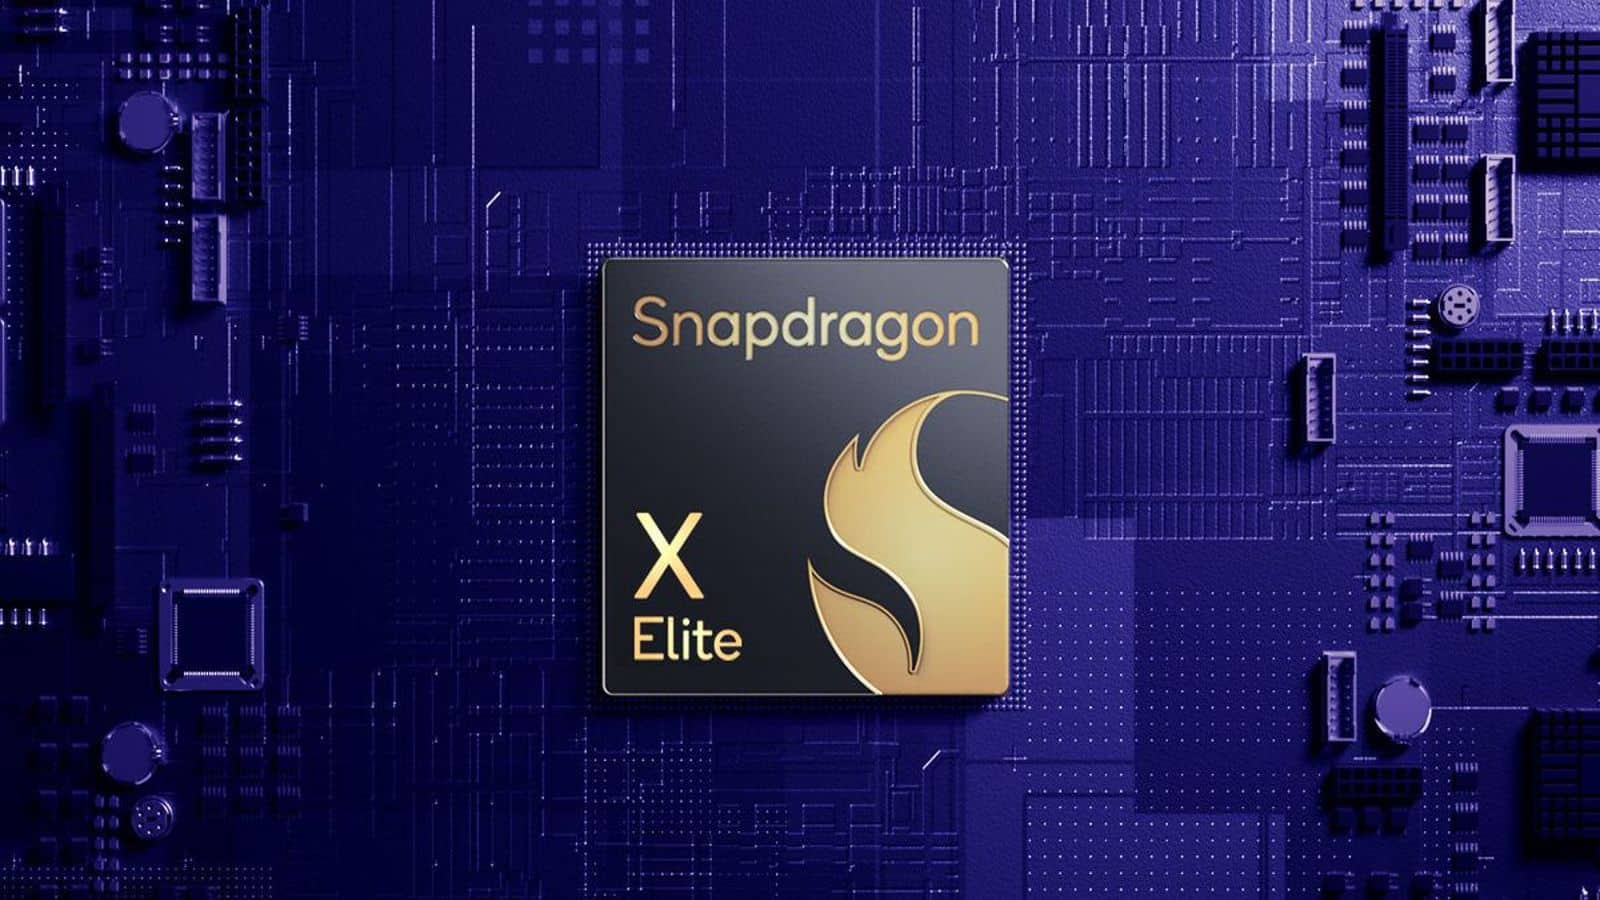 Qualcomm promises game compatibility for future Snapdragon-powered Windows laptops